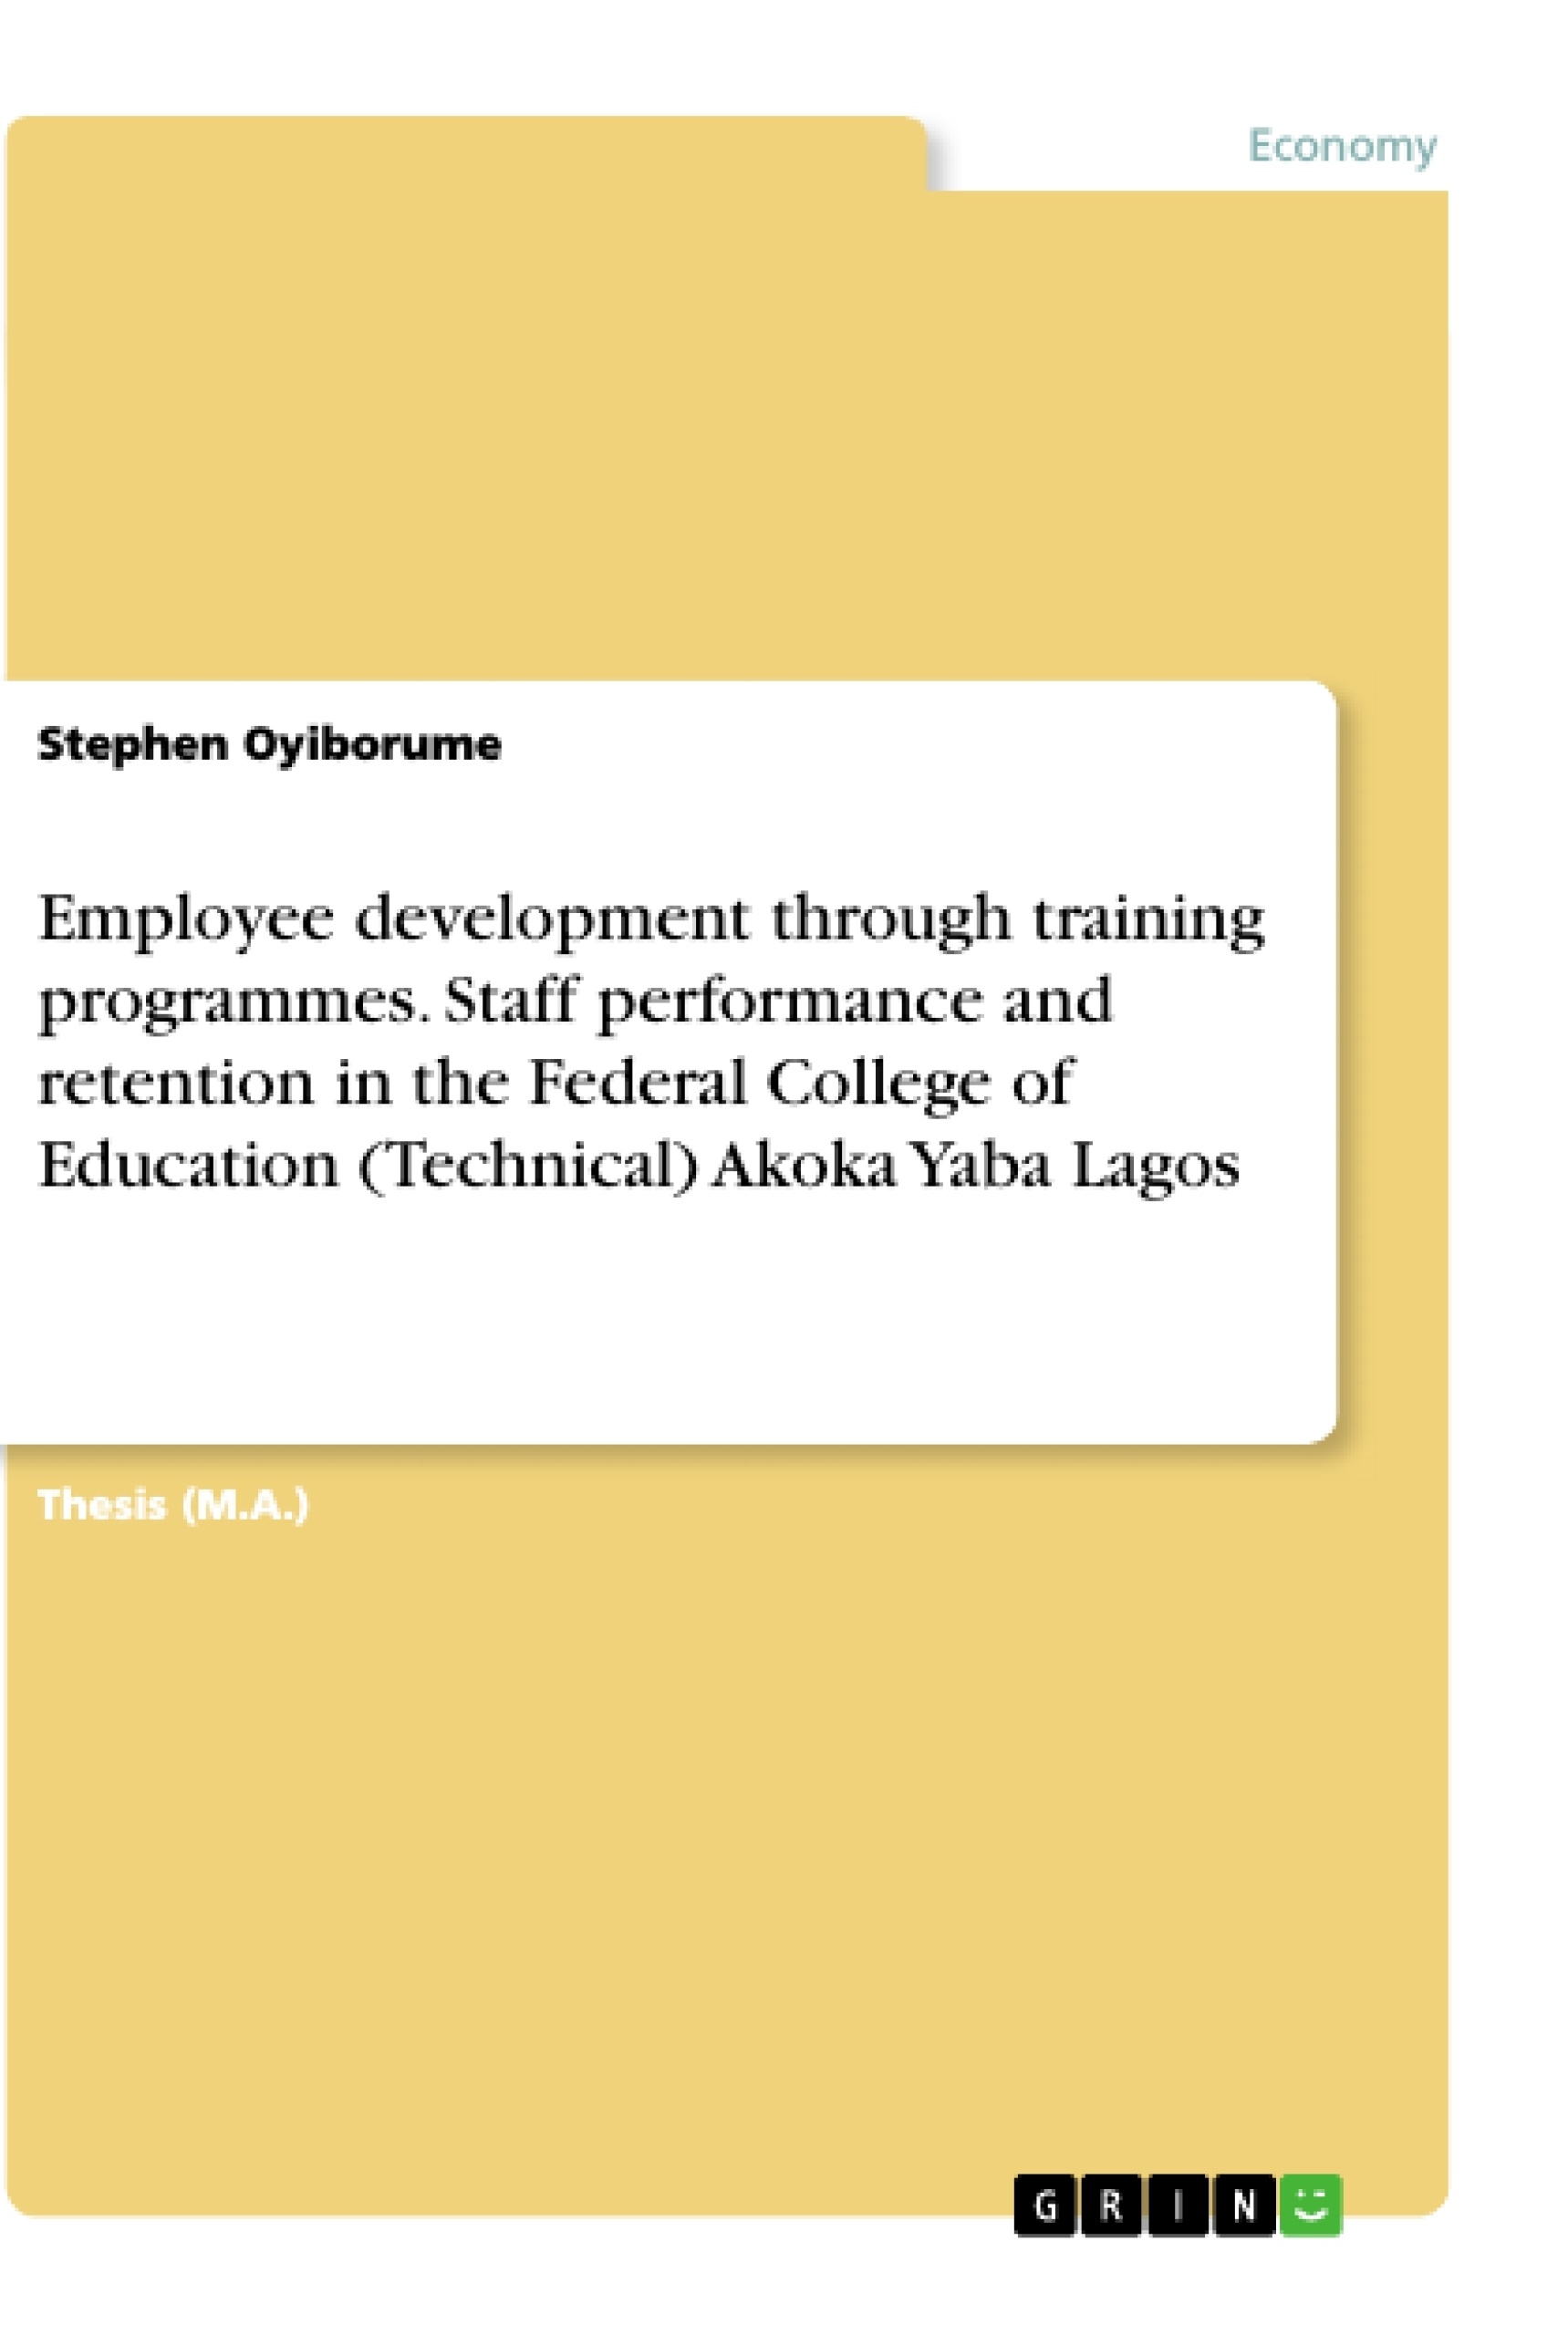 Title: Employee development through training programmes. Staff performance and retention in the Federal College of Education (Technical) Akoka Yaba Lagos